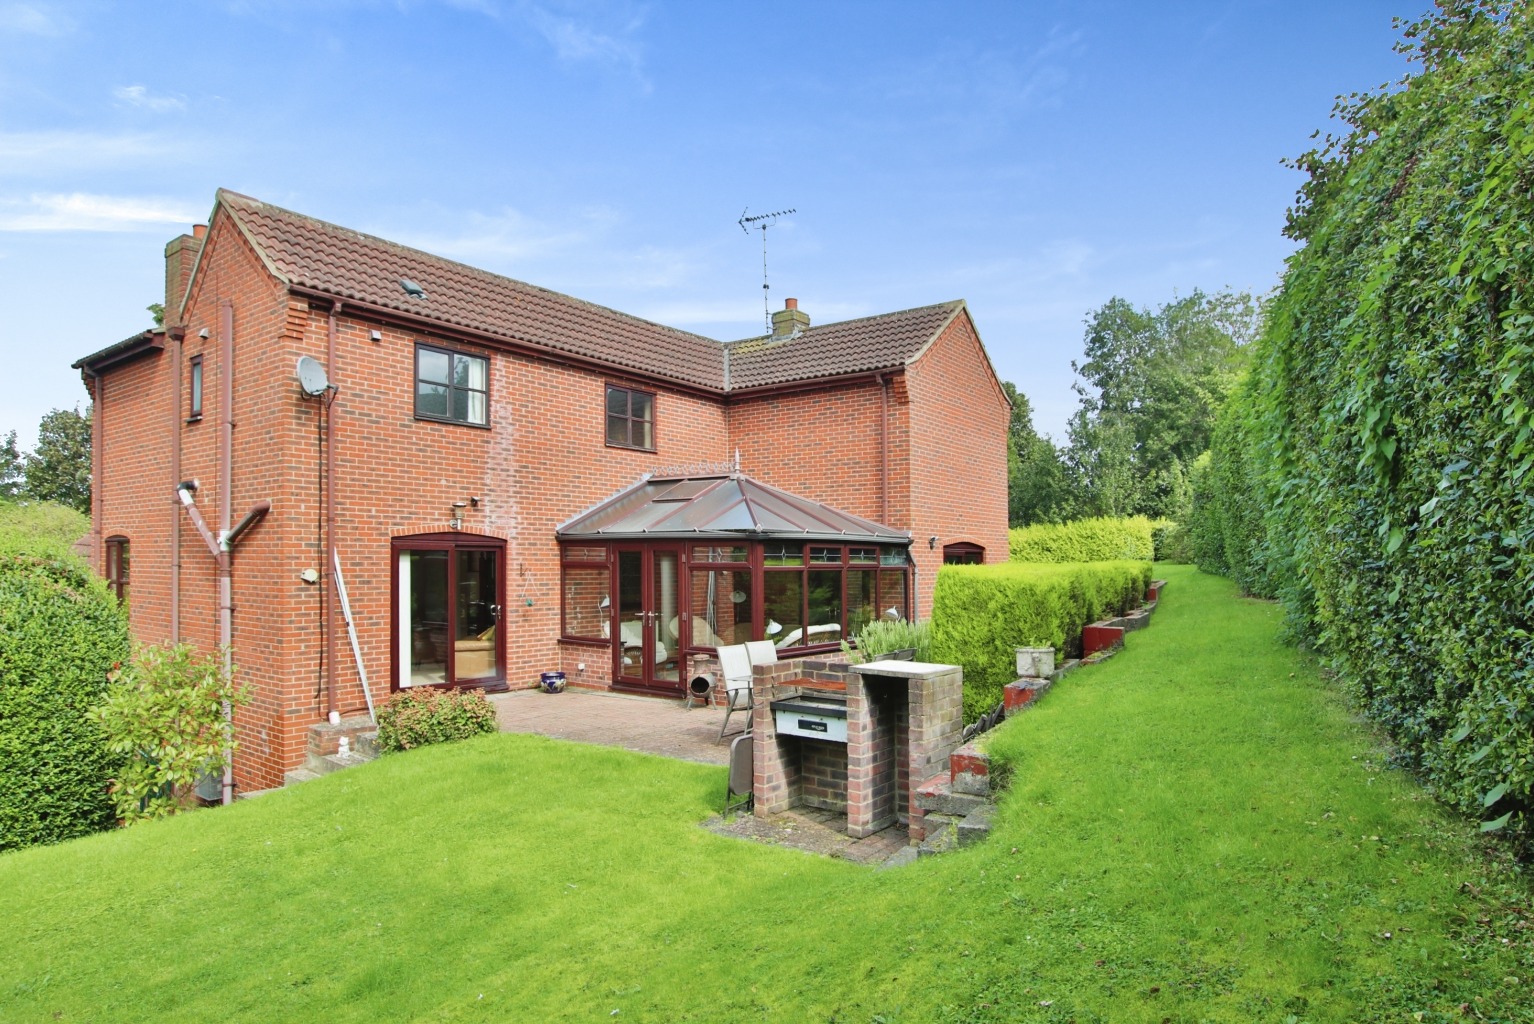 4 bed detached house for sale in Caistor Road, Barton upon Humber  - Property Image 4